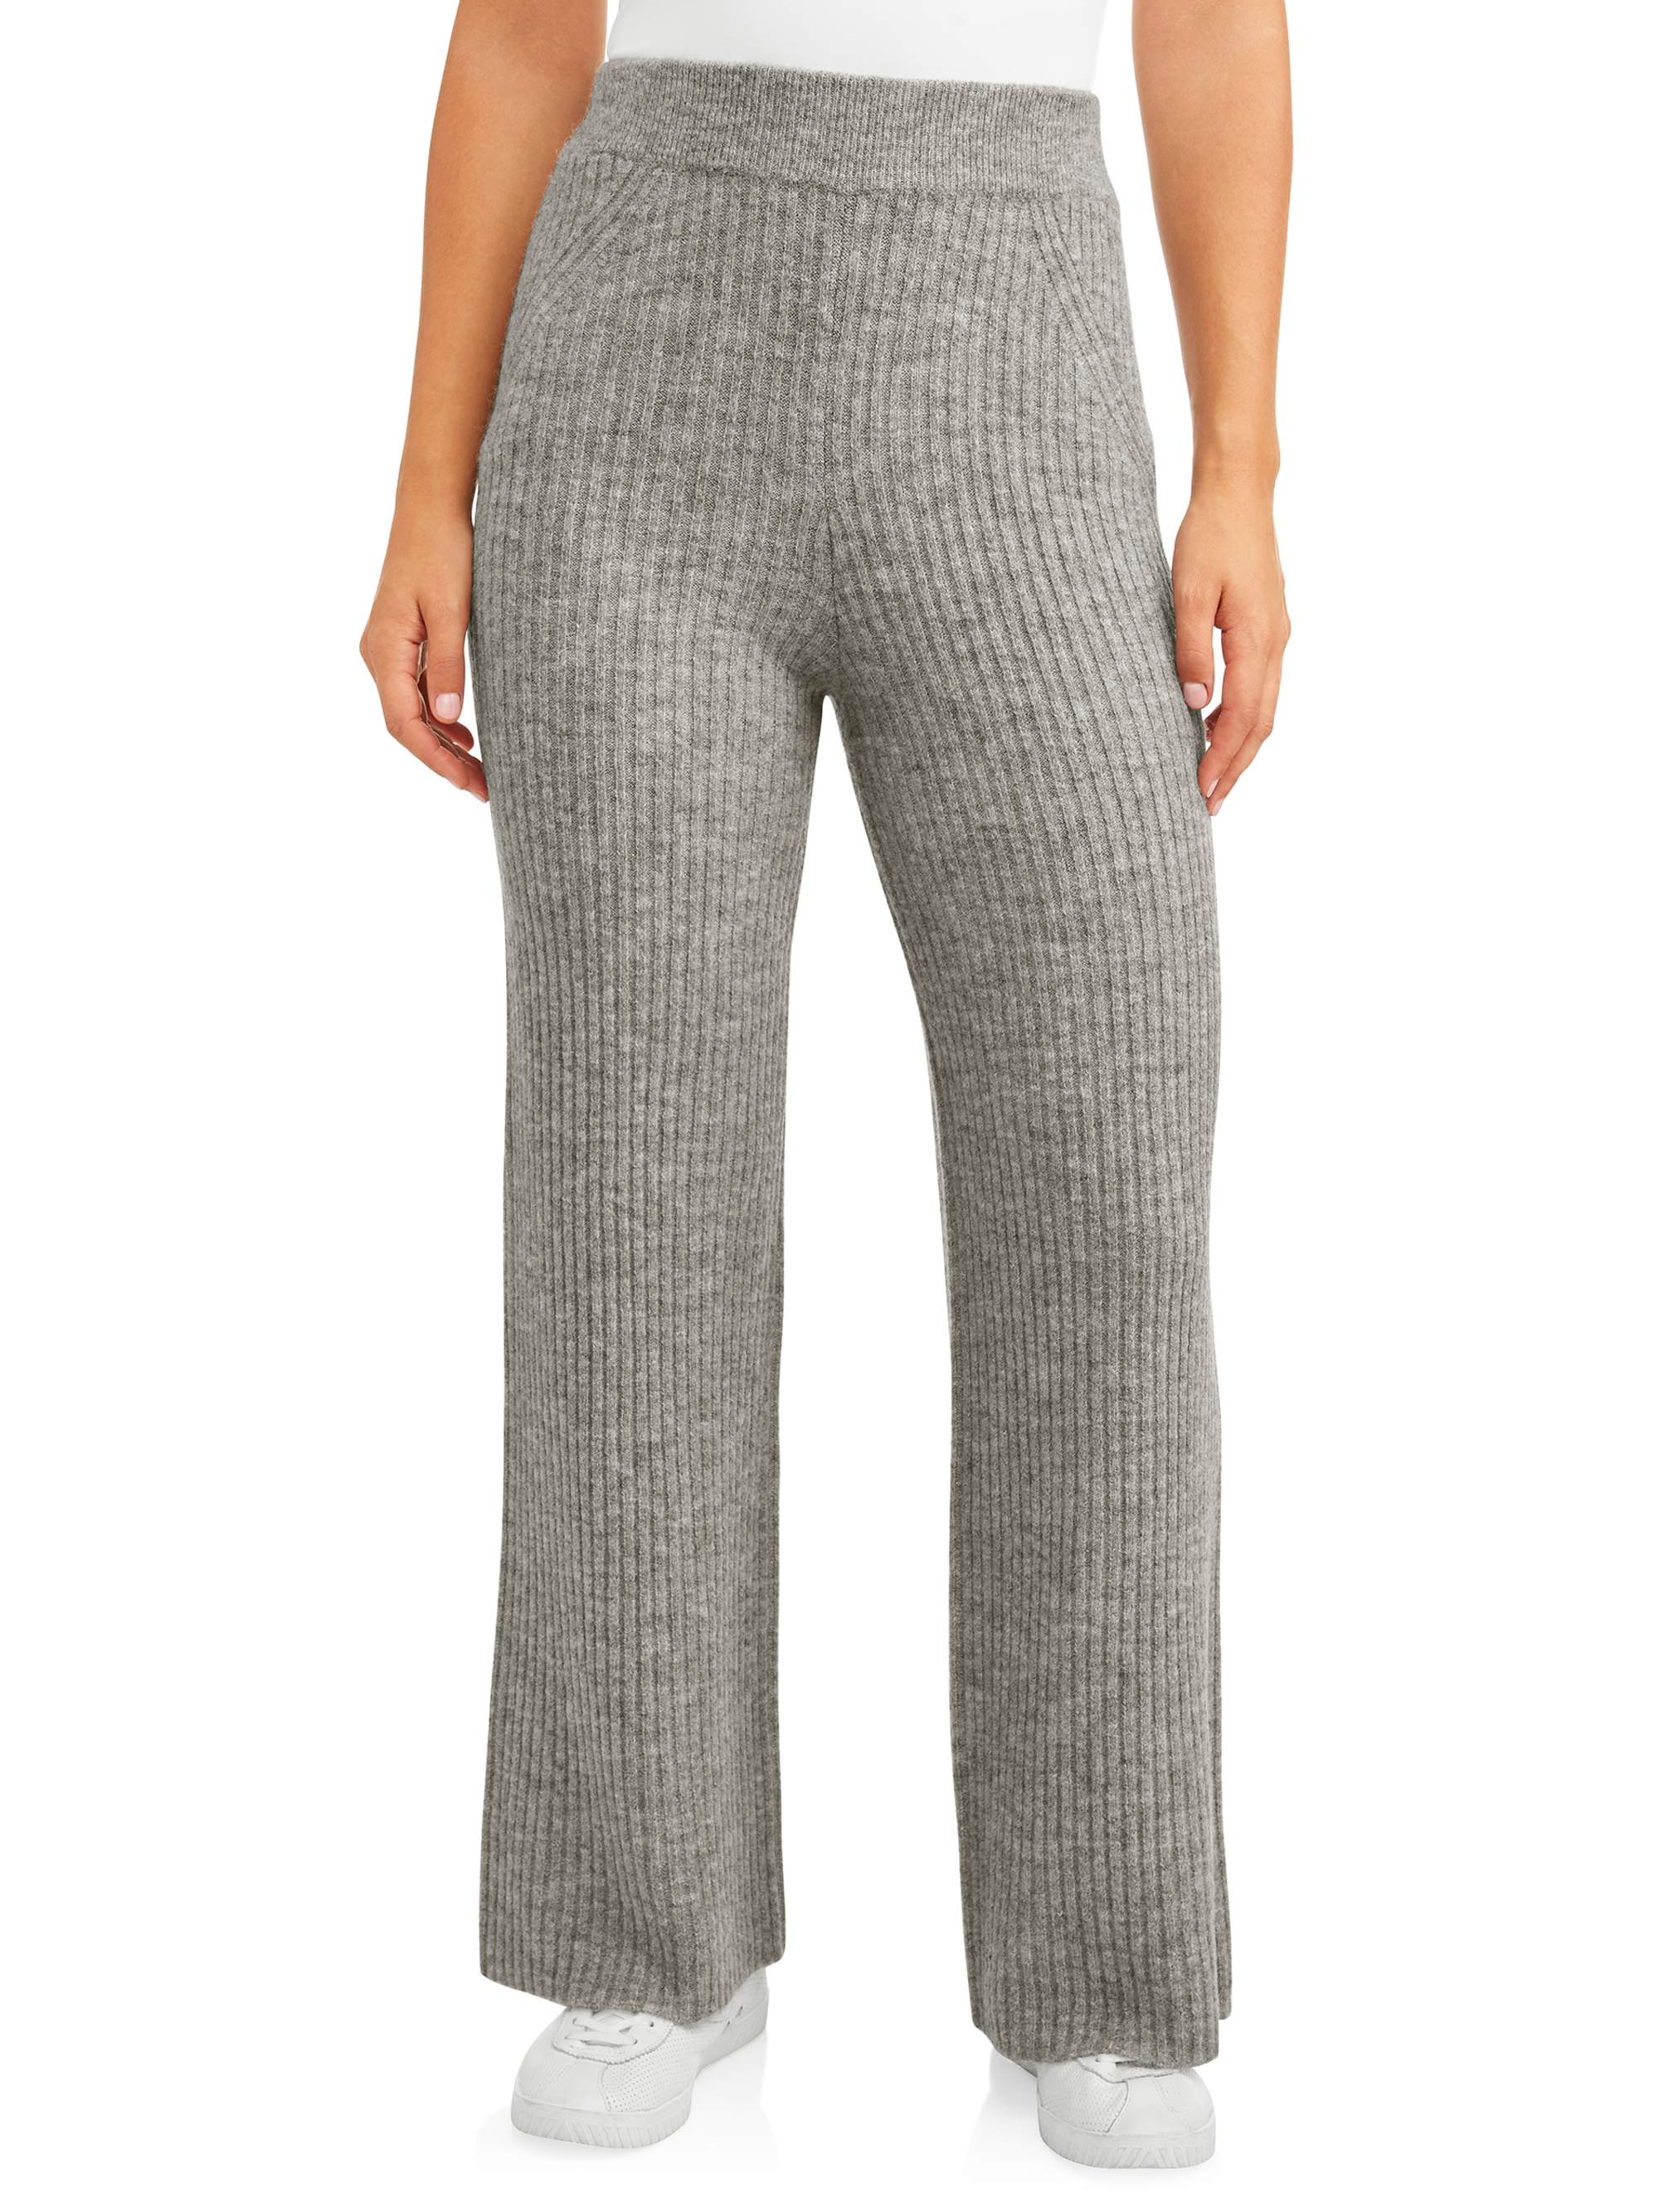 Time and Tru Cozy Knit Pant Women's - image 1 of 5